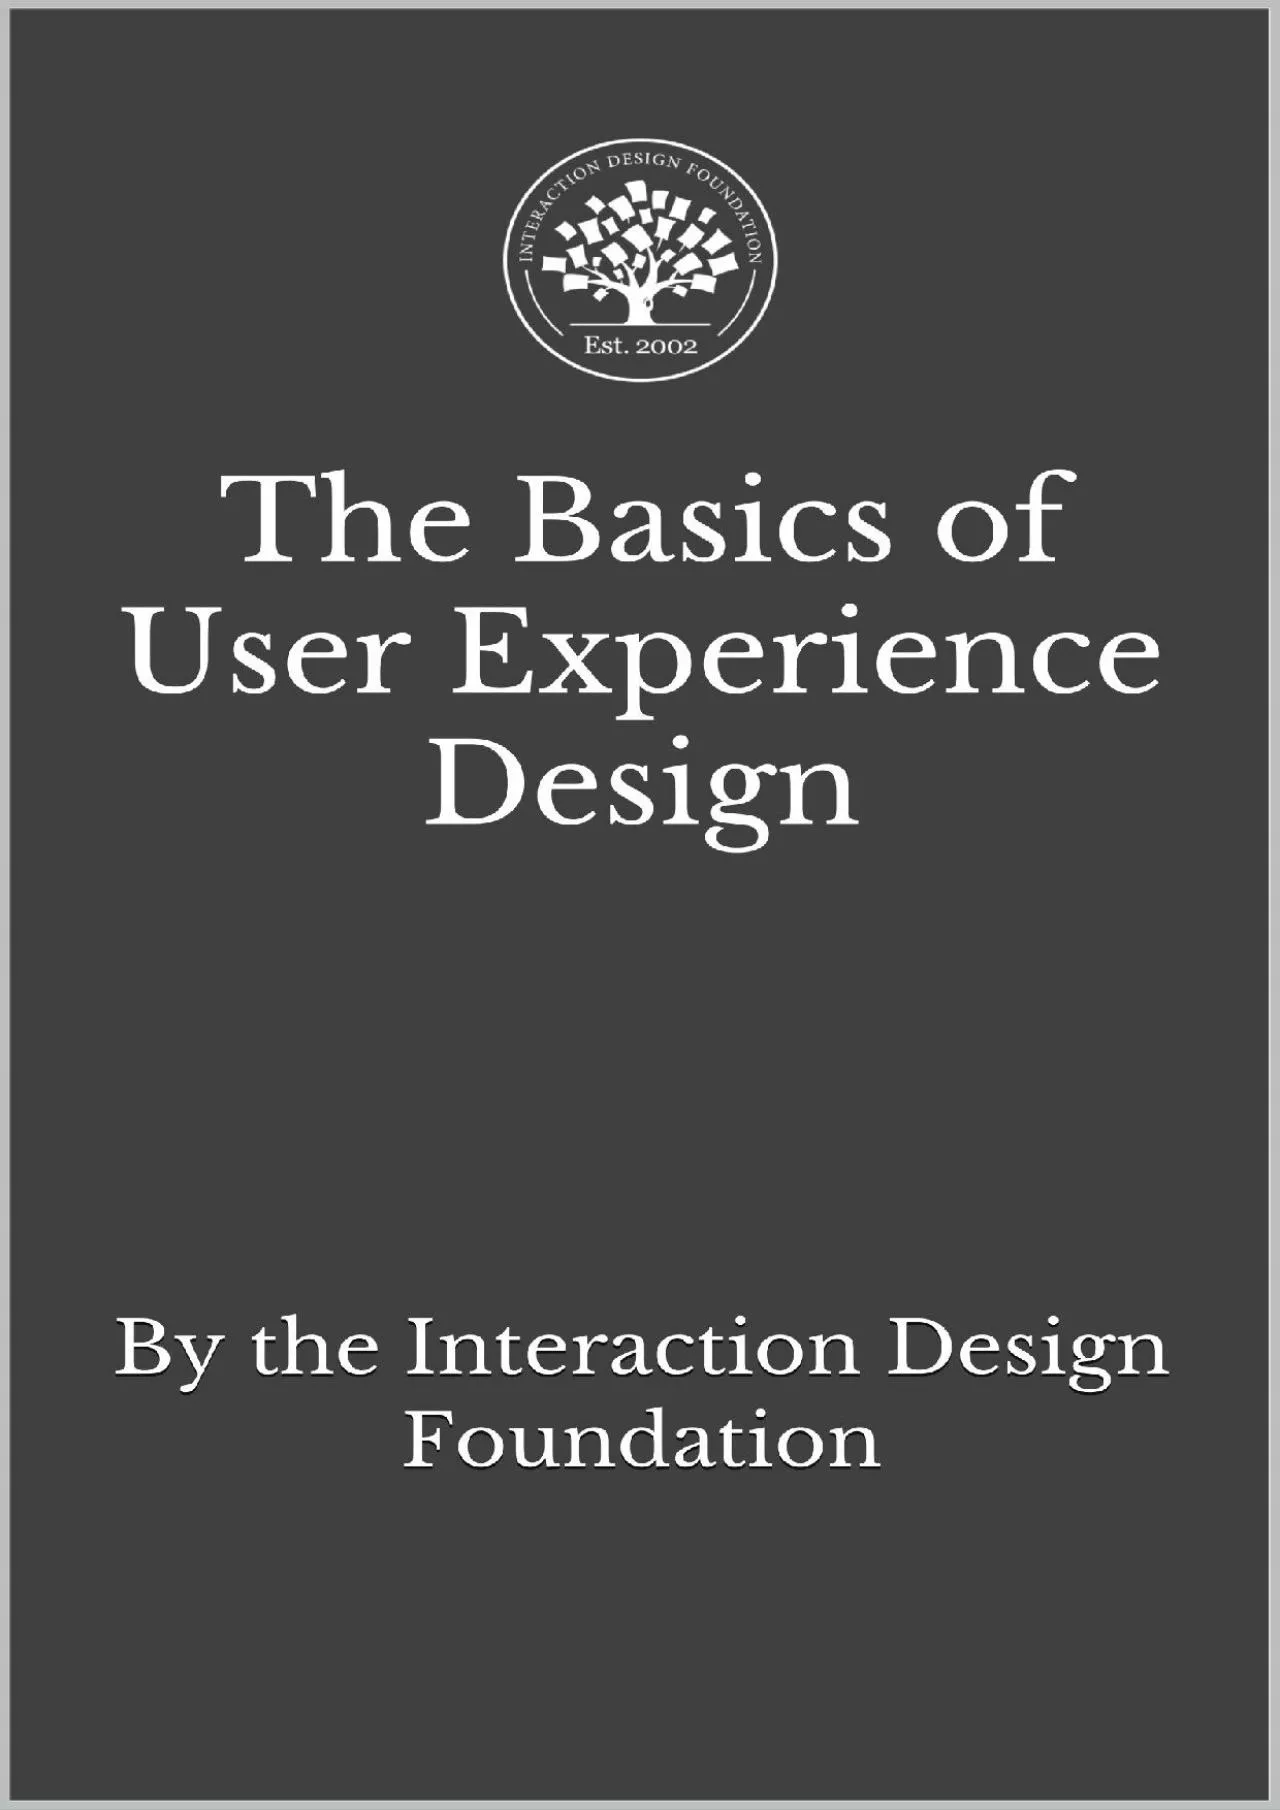 (READ)-The Basics of User Experience Design A UX Design Book by the Interaction Design